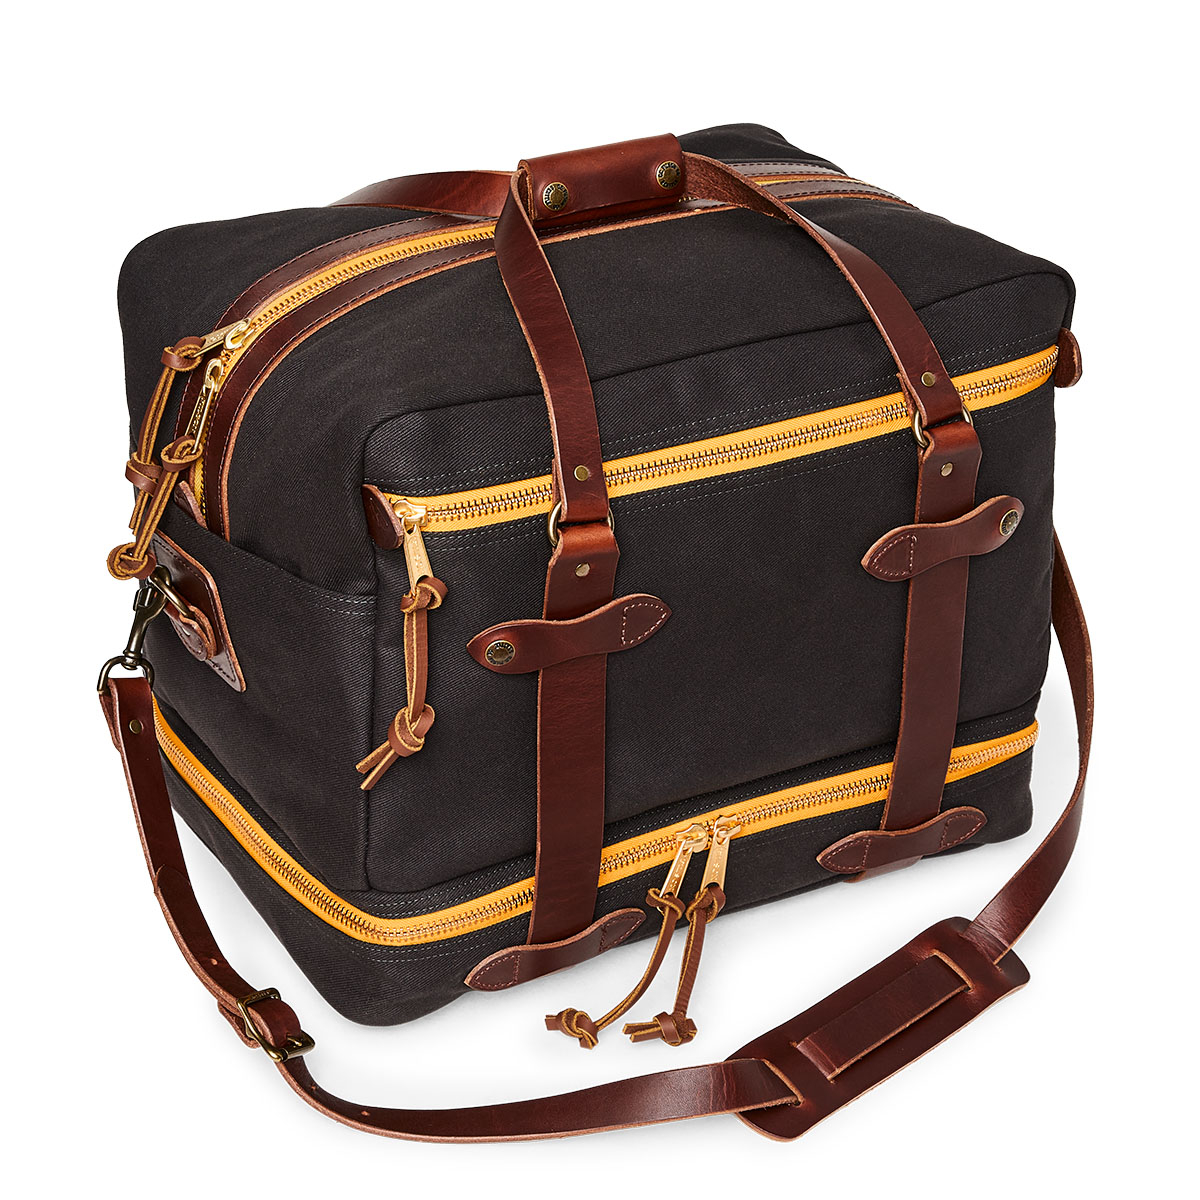 Filson Traveller Outfitter Bag Stapleton Cinder, made in signature water-resistant Rugged Twill cotton, this travel bag protects clothing and gear with a separate compartment for dirty items.